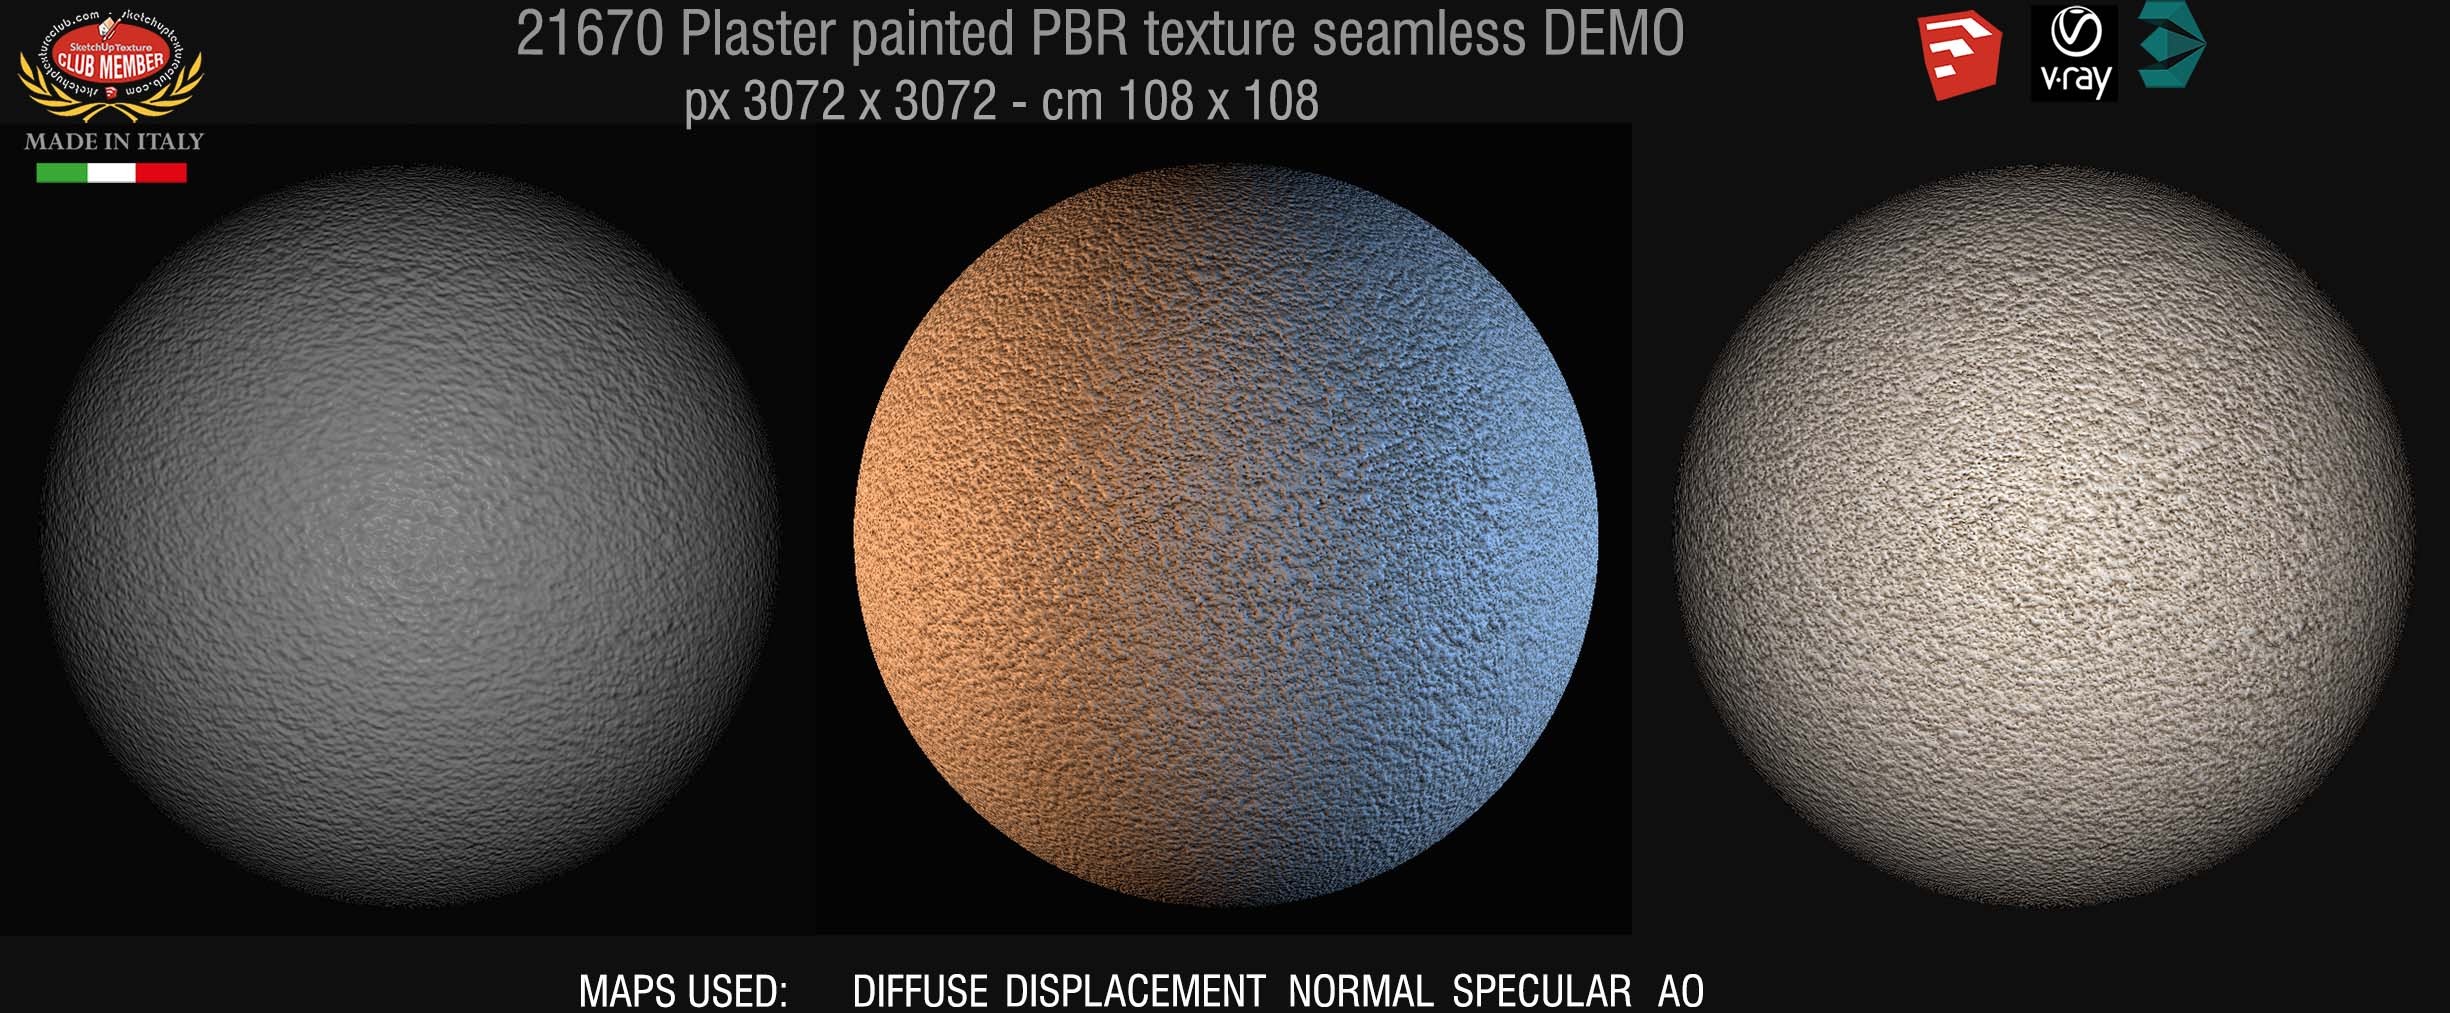 21670 plaster painted PBR texture seamless DEMO